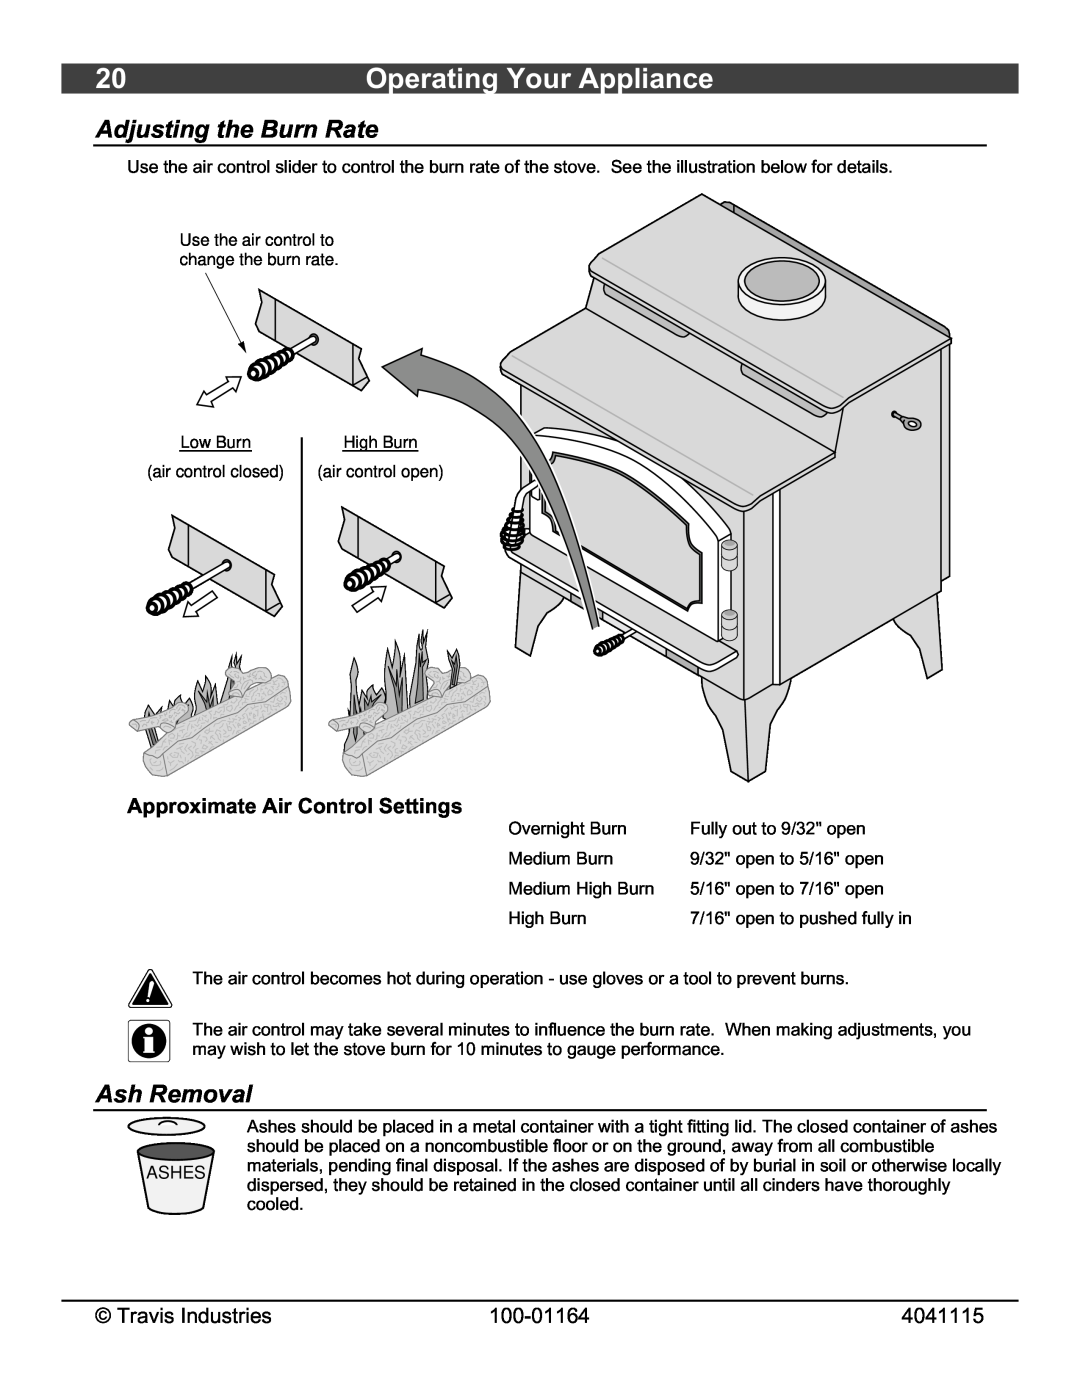 Lopi Liberty Wood Stove Operating Your Appliance, Adjusting the Burn Rate, Ash Removal, Travis Industries, 100-01164 